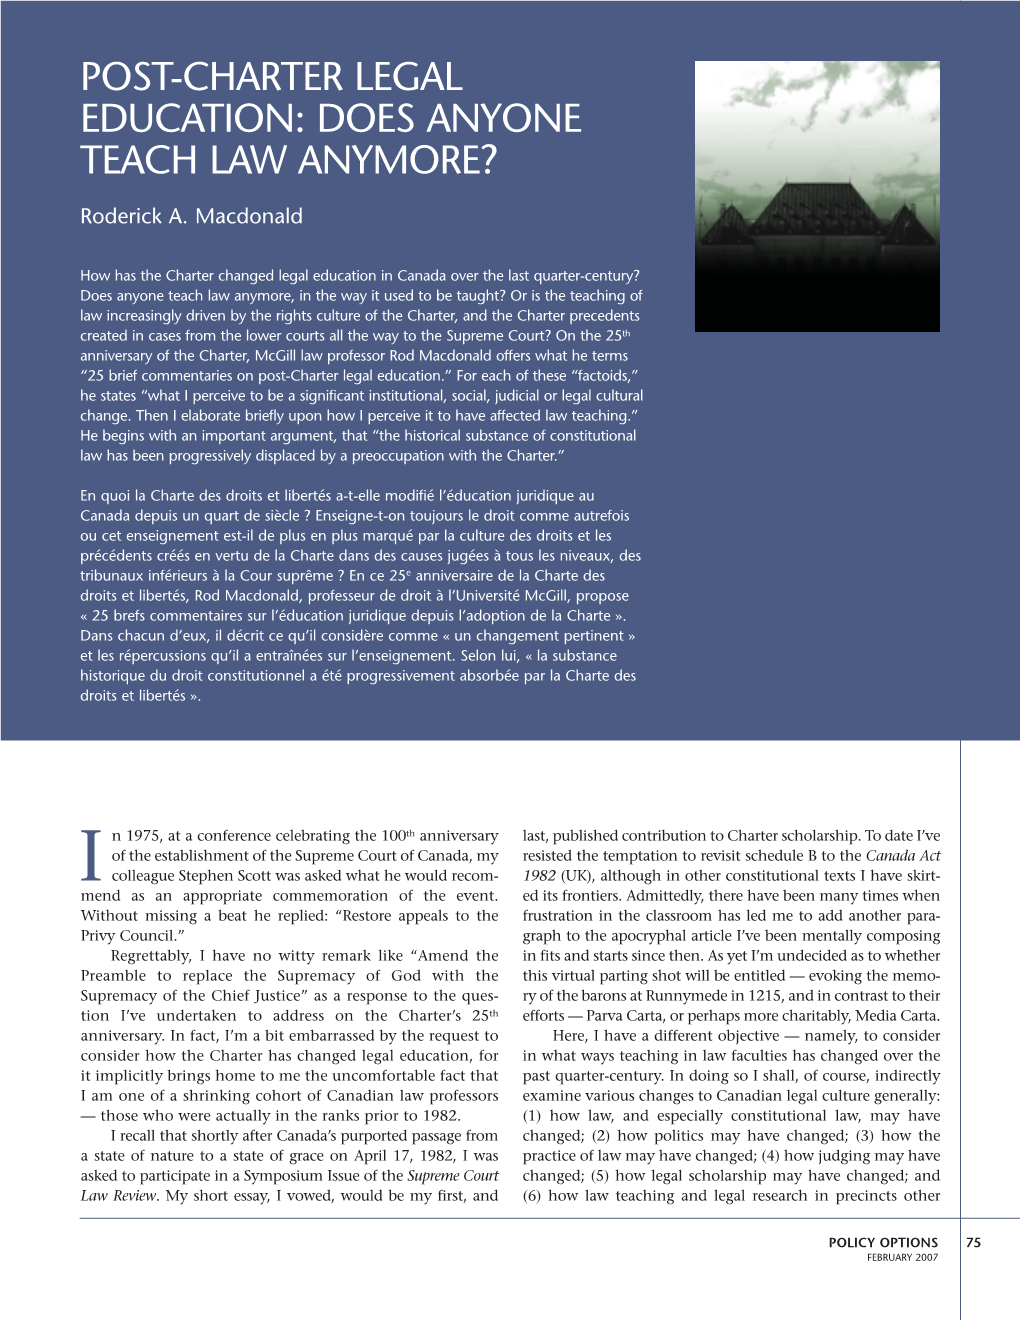 Post-Charter Legal Education: Does Anyone Teach Law Anymore?